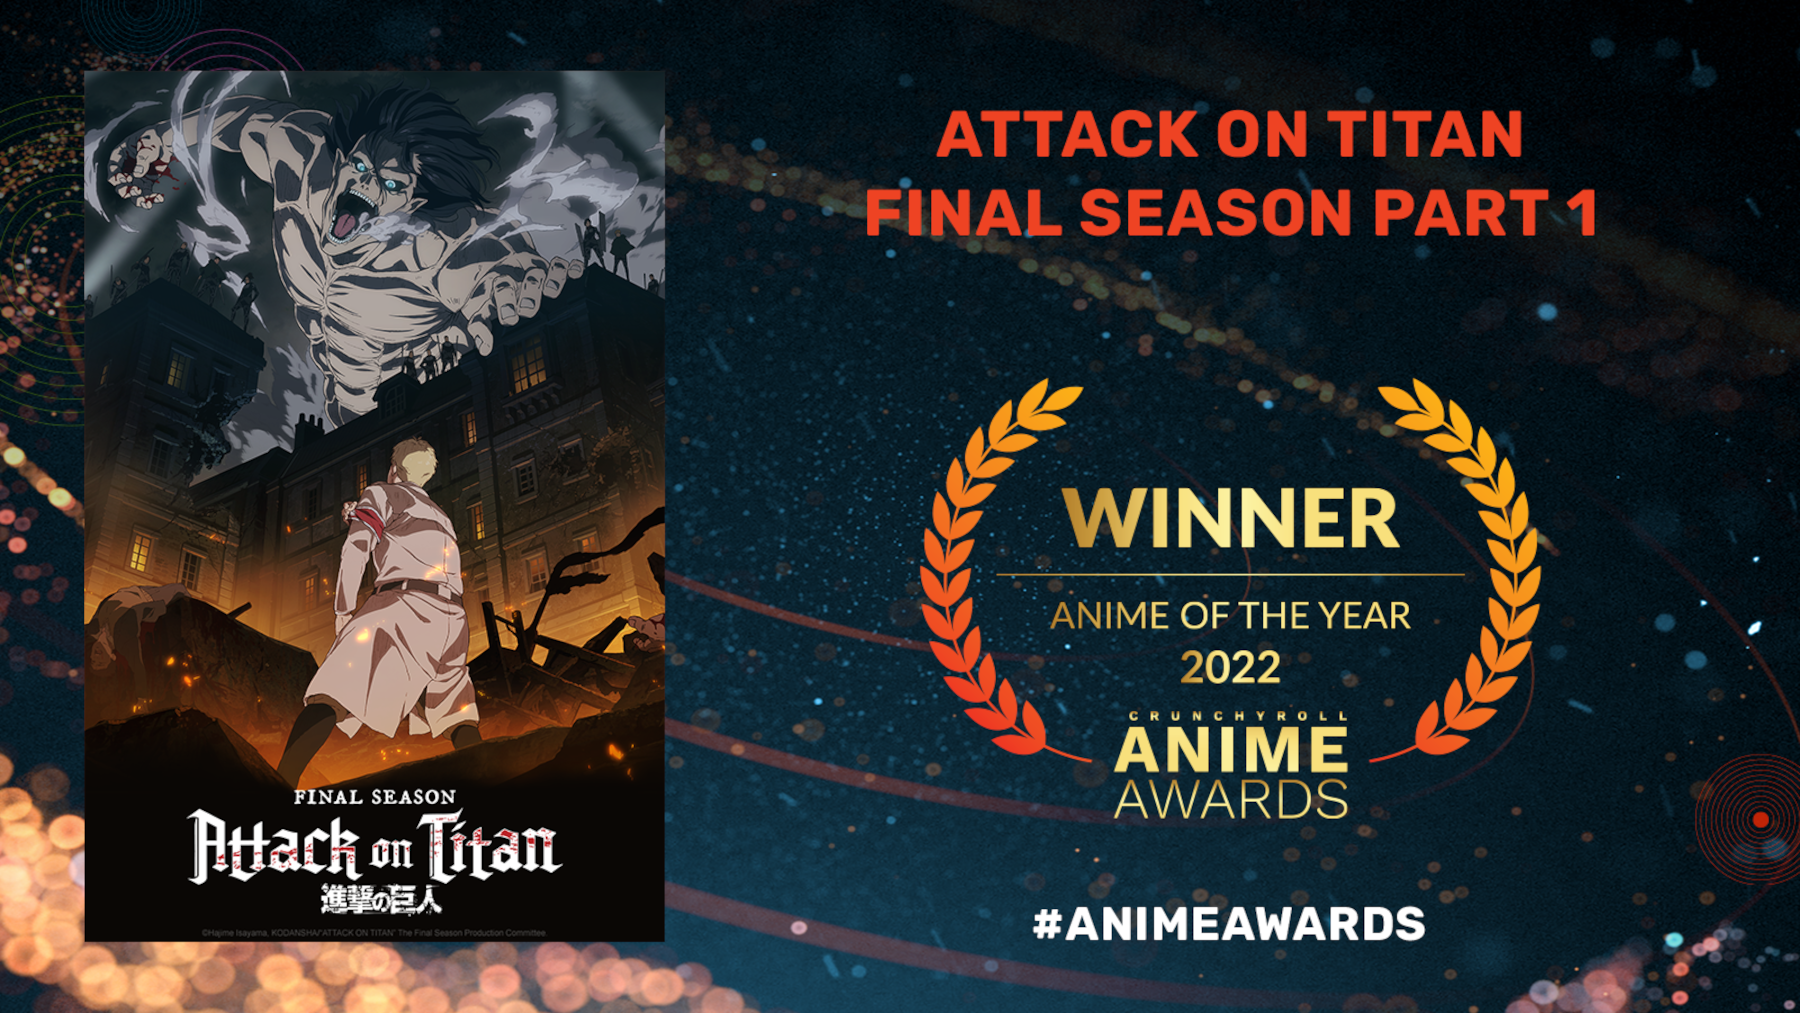 Crunchyroll Names 'Attack on Titan' Anime of the Year in 2022 Anime Awards  — Here's the Full List of Winners